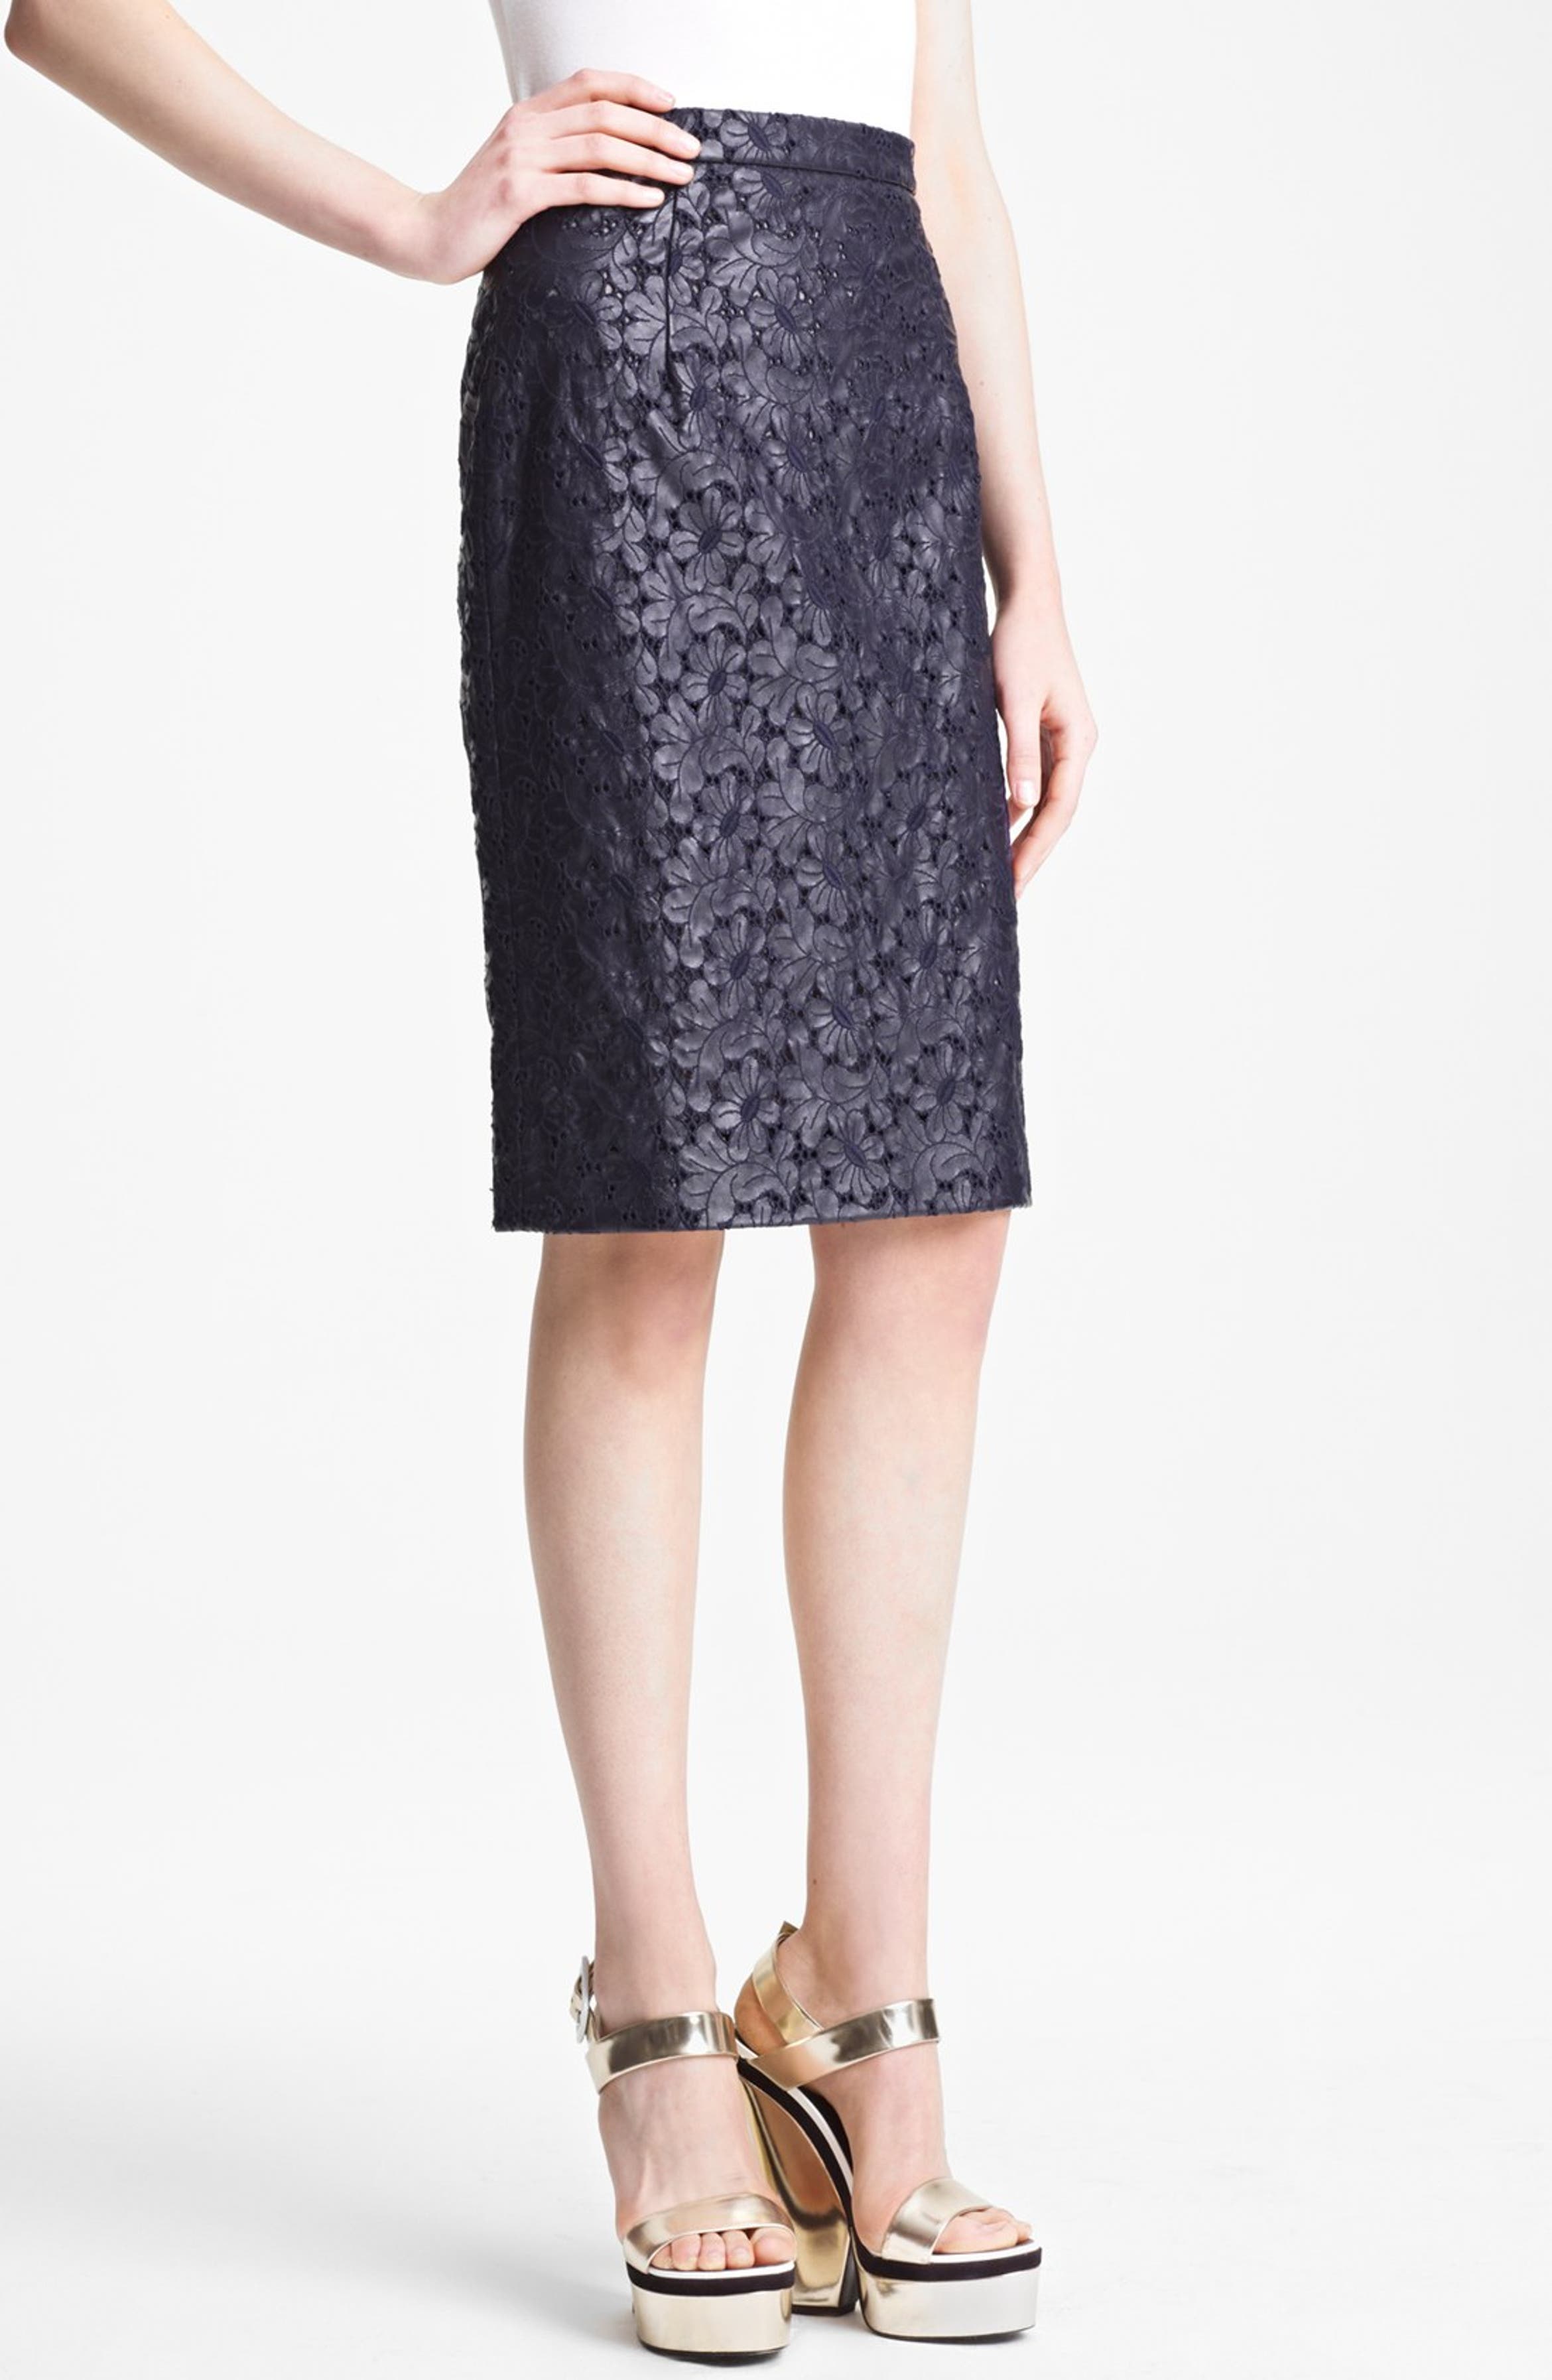 Erdem 'Embroidery Anglais' Faux Leather Pencil Skirt | Nordstrom